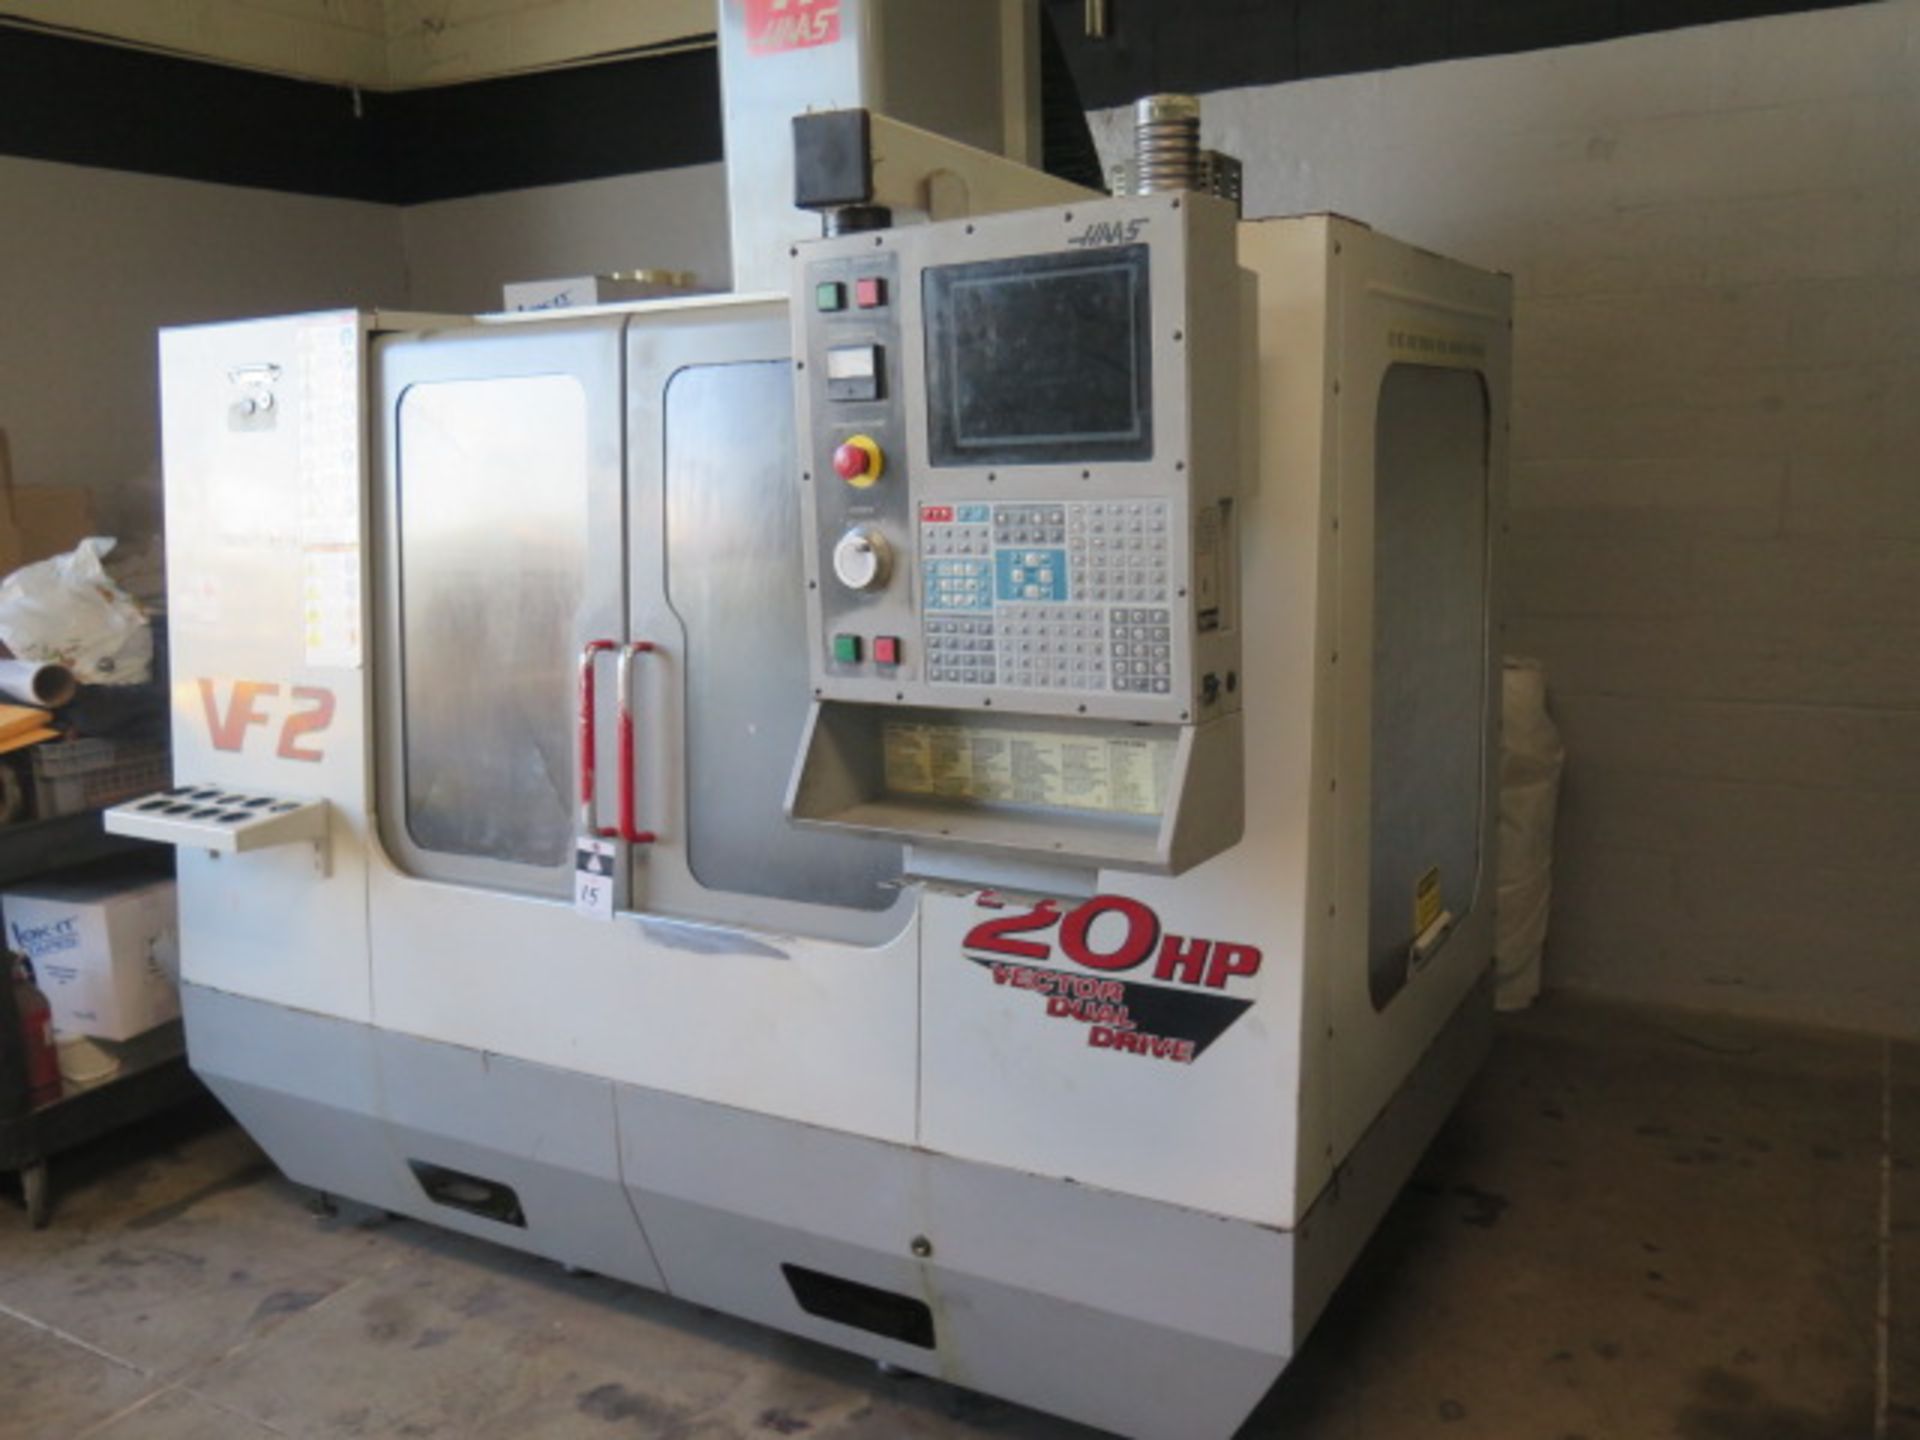 2001 Haas VF-2D 5-Axis Capable CNC VMC s/n 27266 w/ Haas Controls, 20 ATC, SOLD AS IS - Image 2 of 14